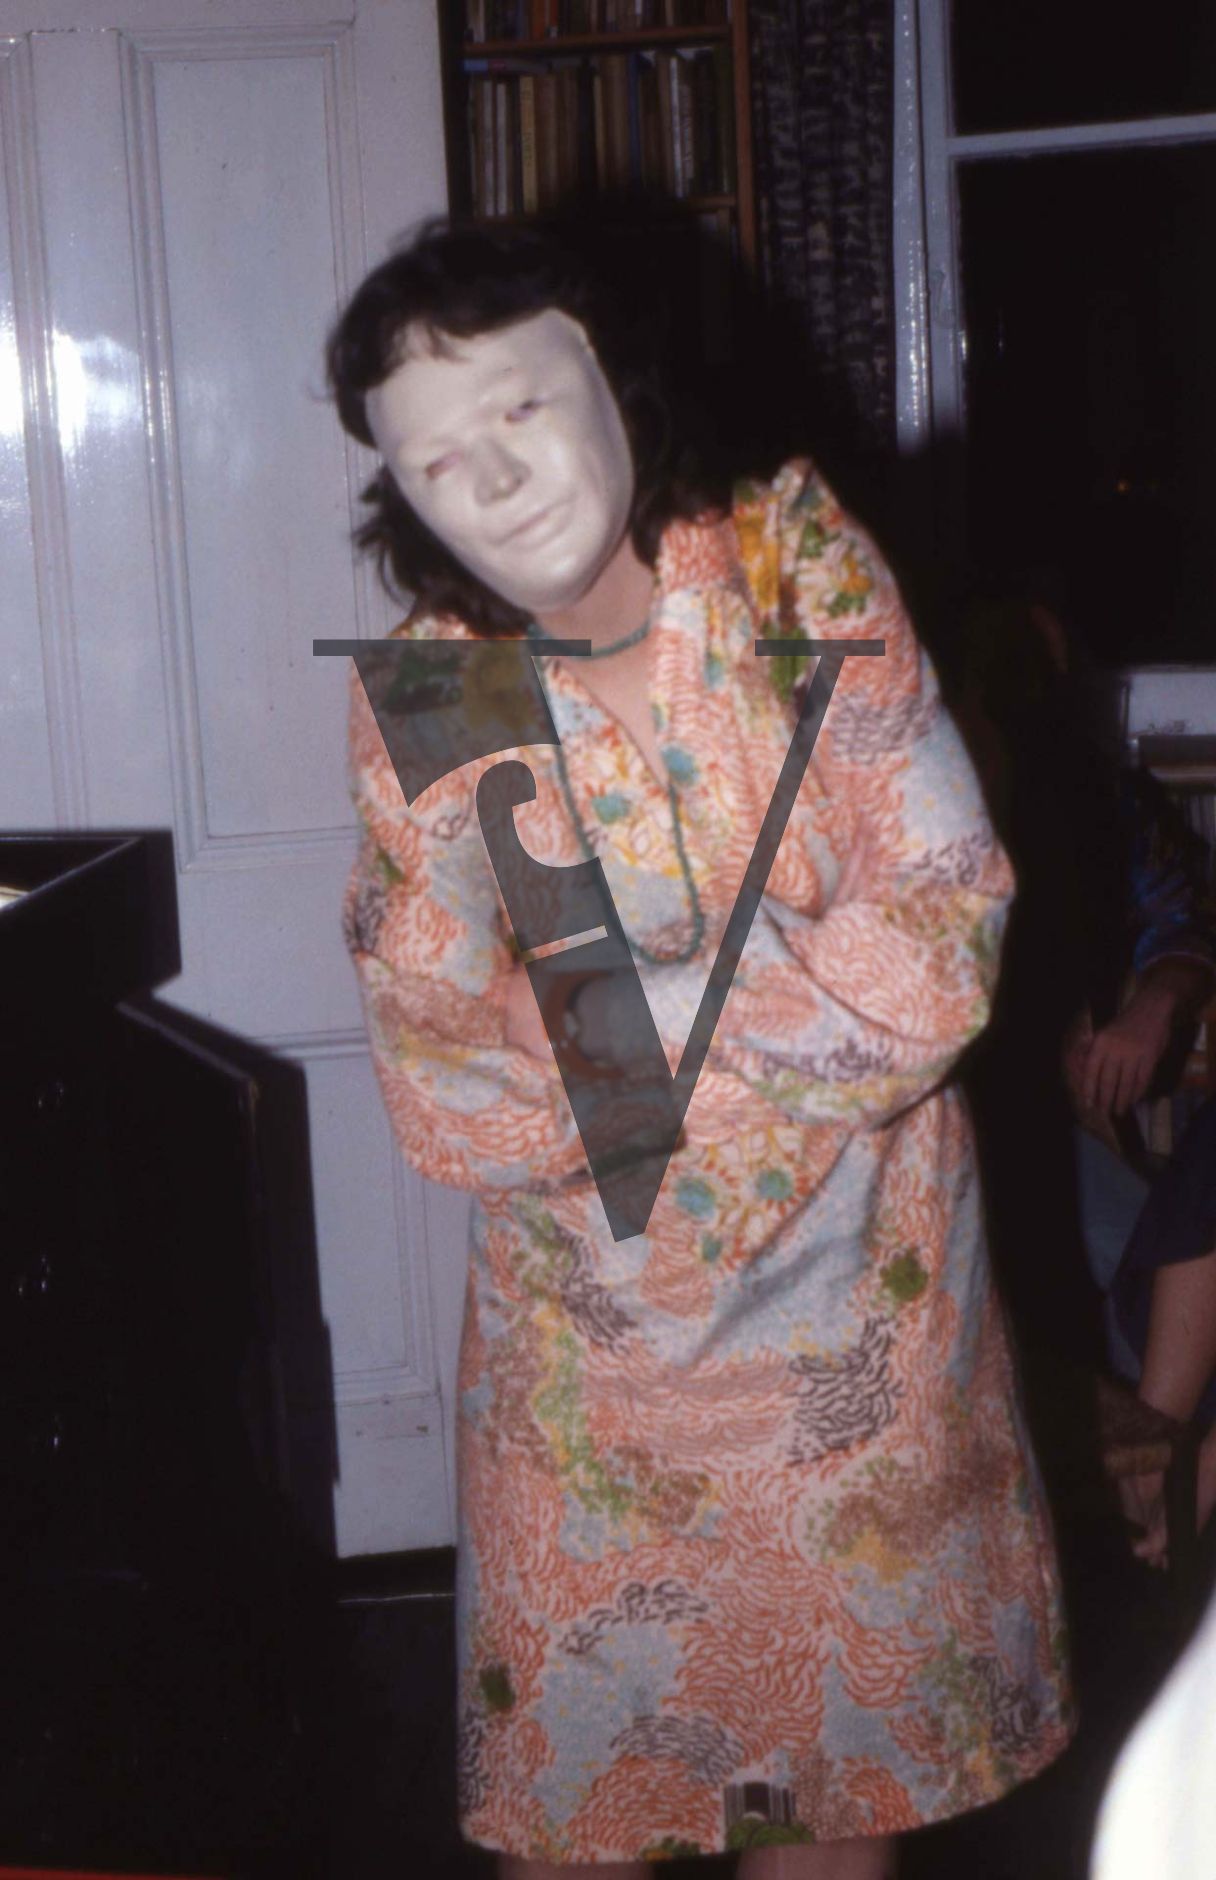 Francis Huxley Mask Party, Unknown.